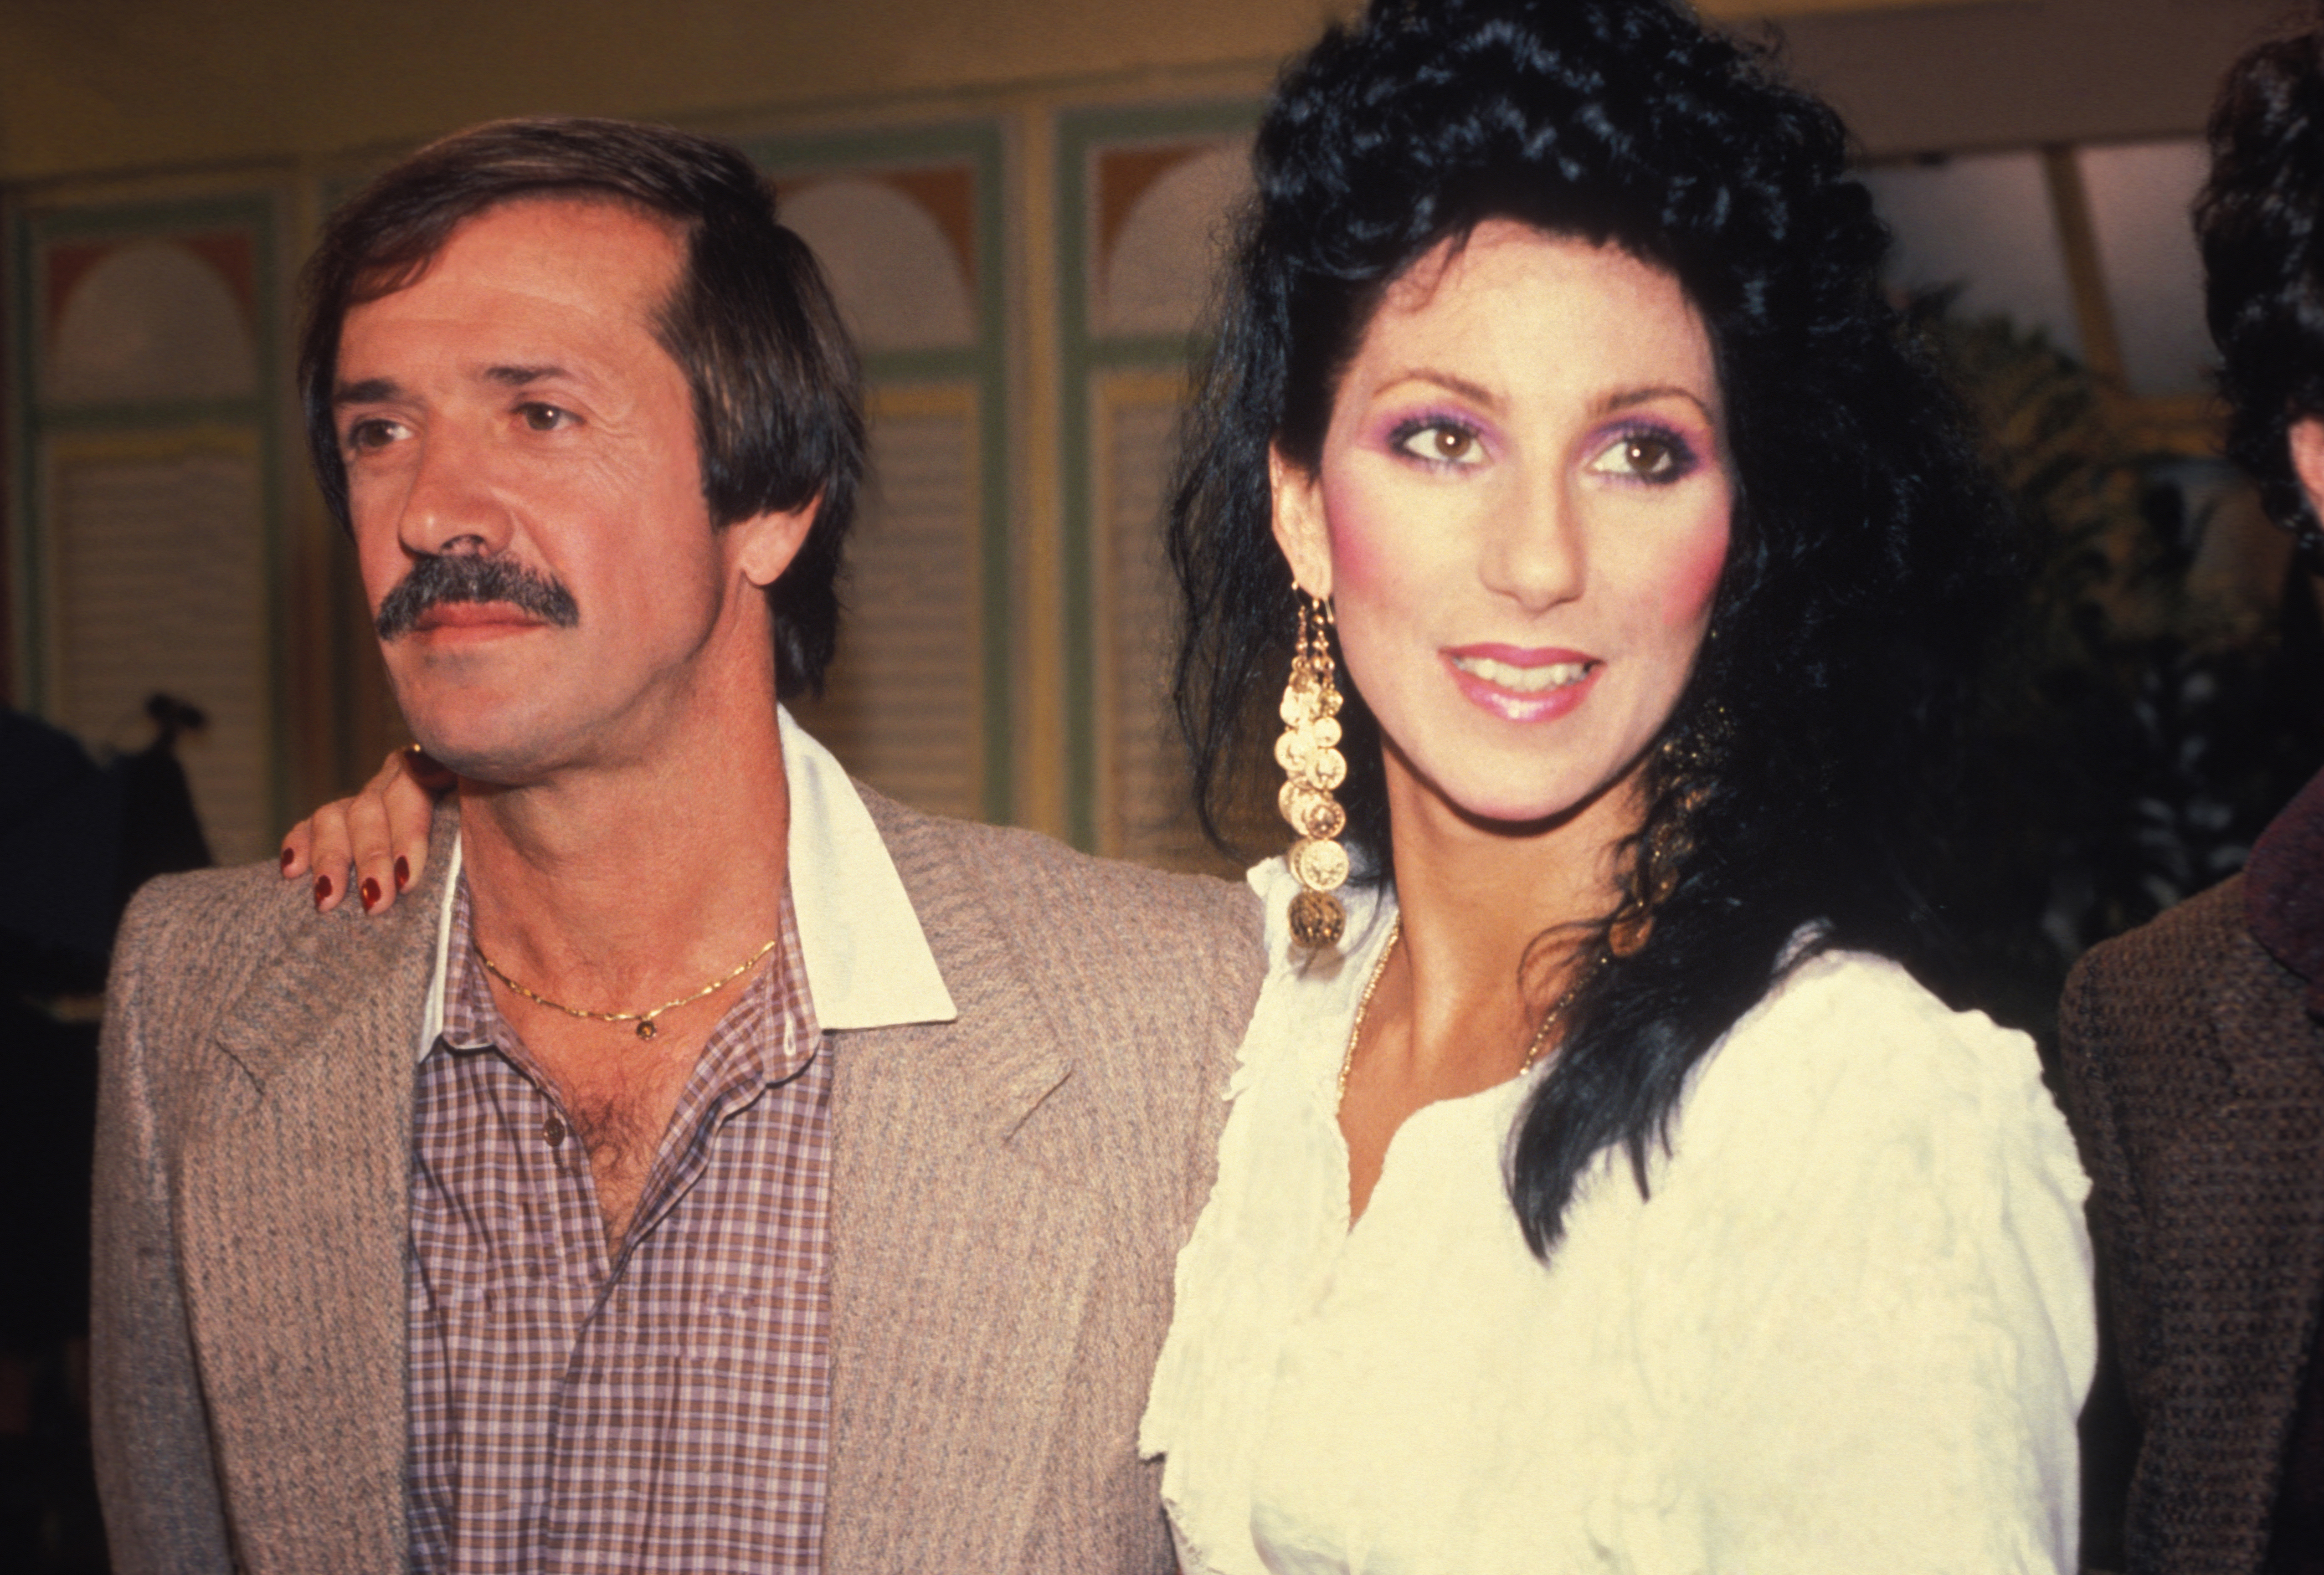 Sonny Bono and Cher, circa 1980 | Source: Getty Images